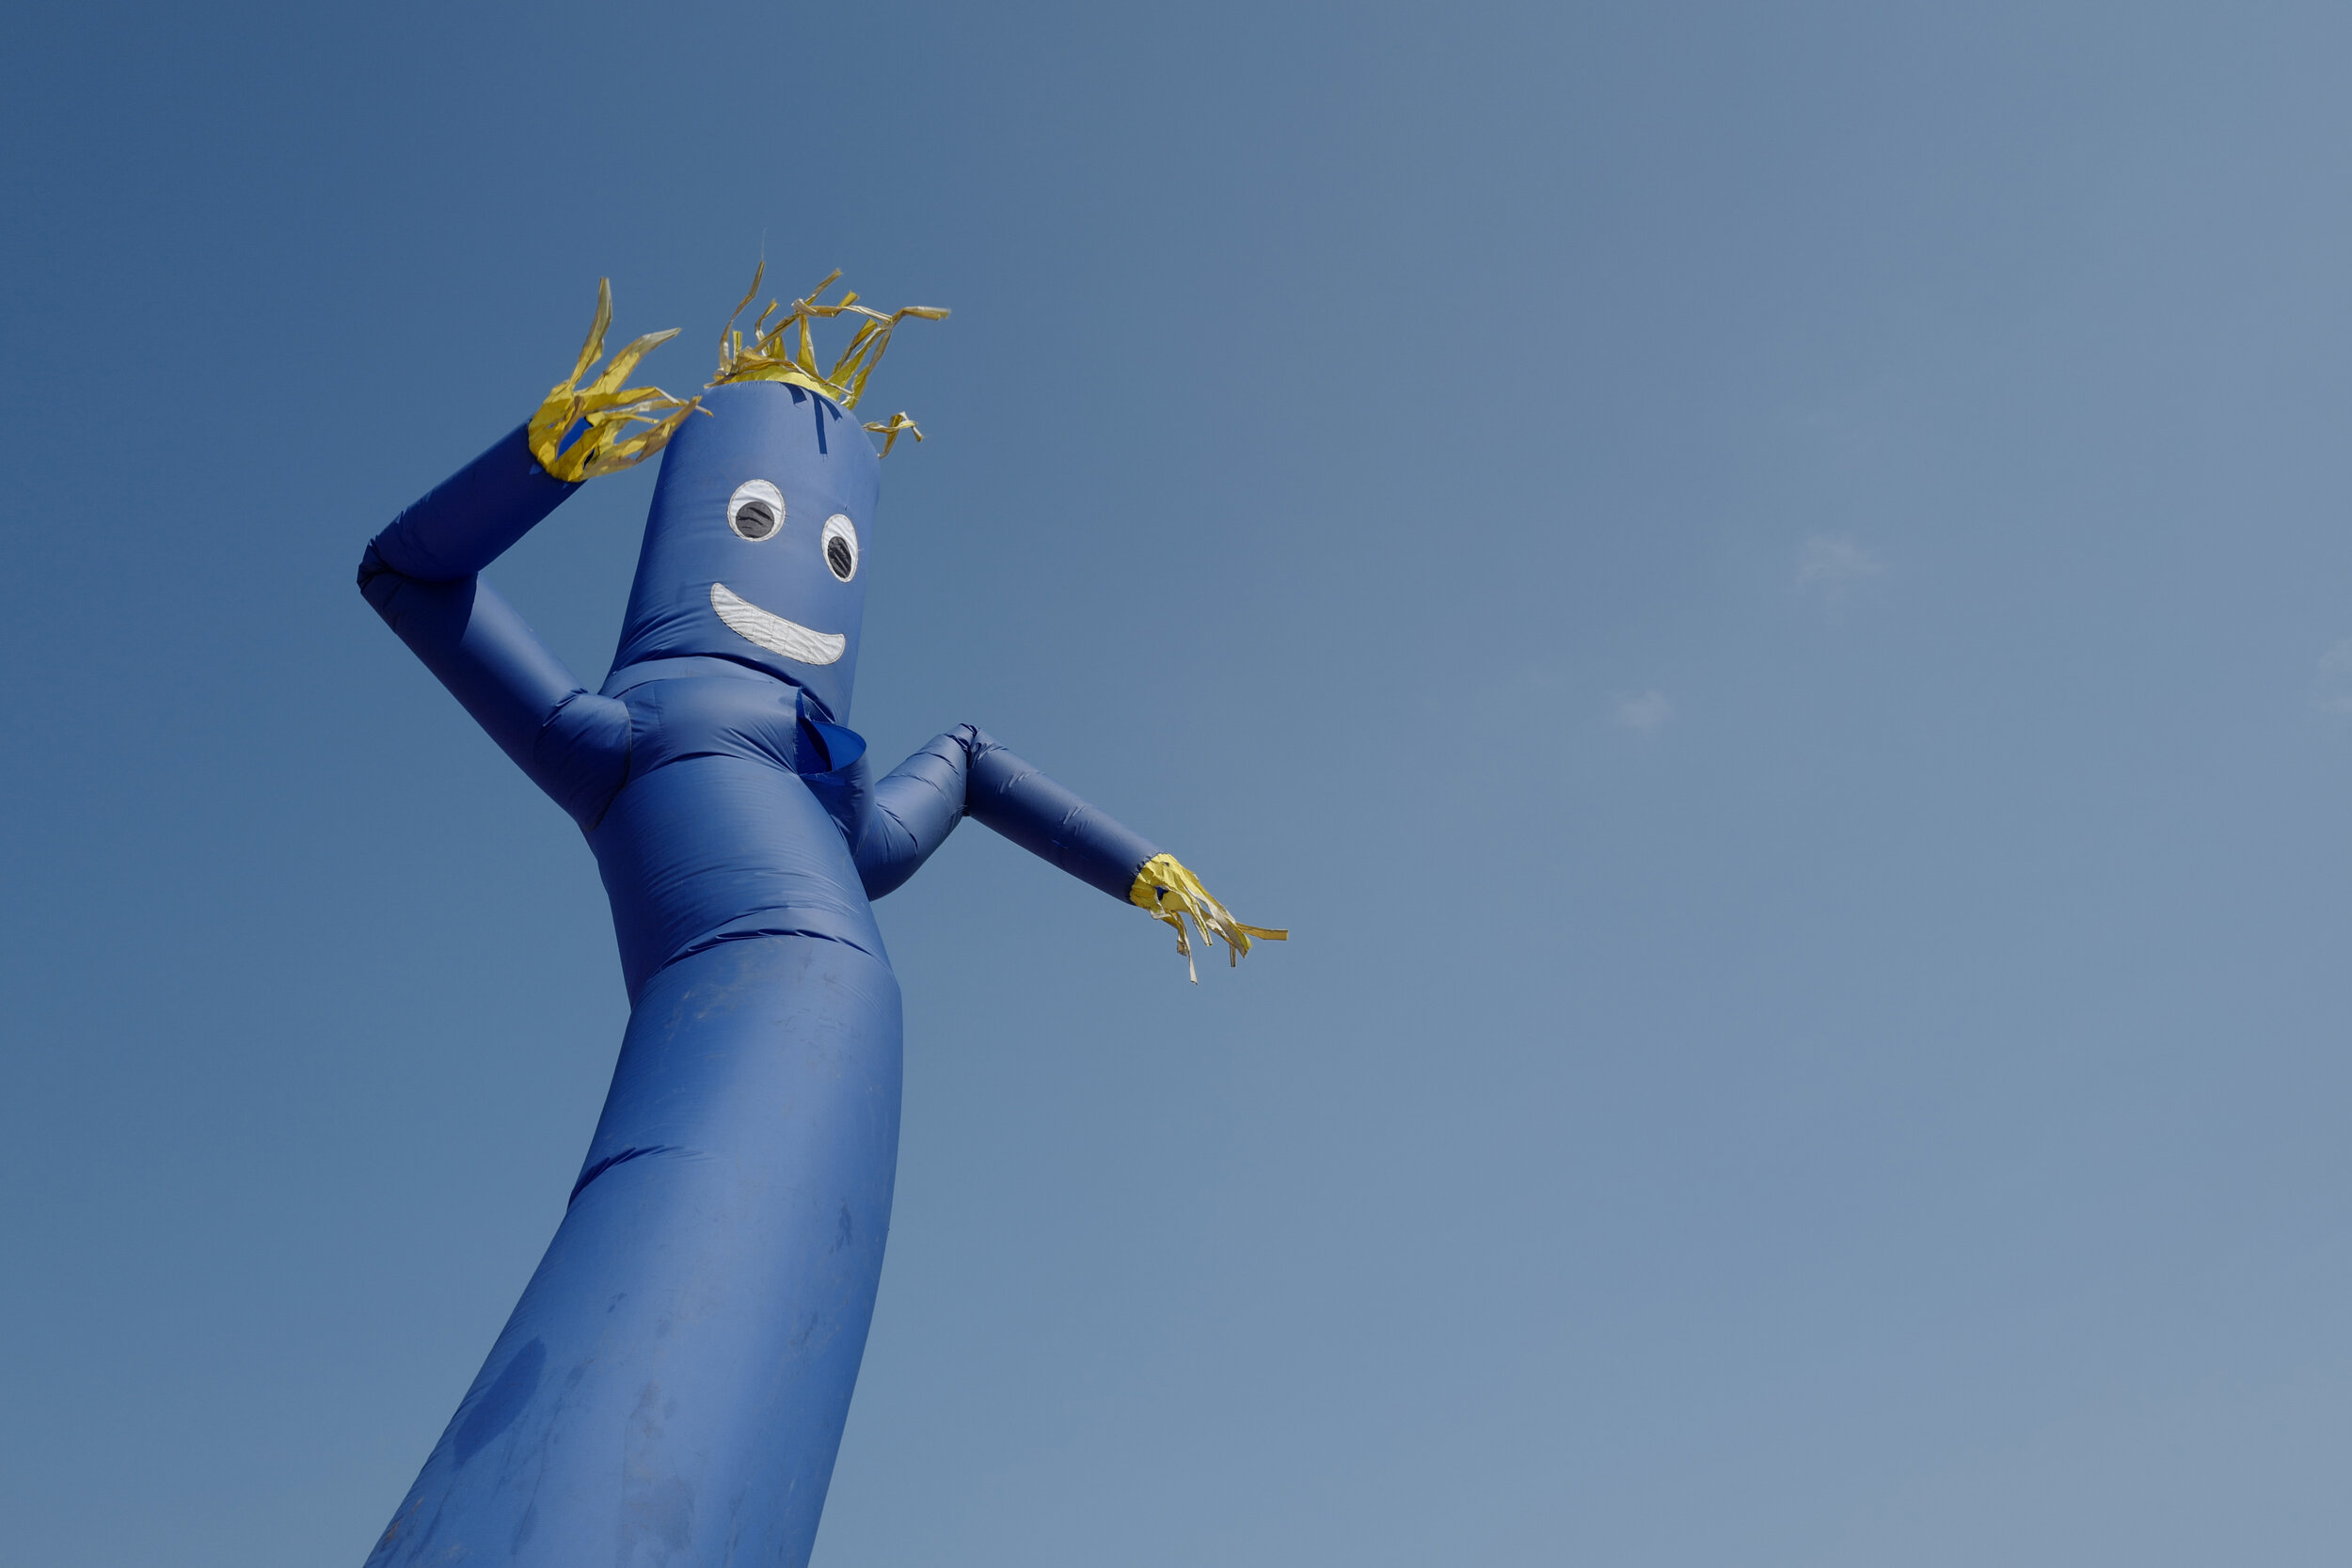  Wacky inflatable flailing arm man. Although joy is designed to be portrayed with this model, seeing this design brings on a melancholy feel to me. - Shot with - Leica Q. 